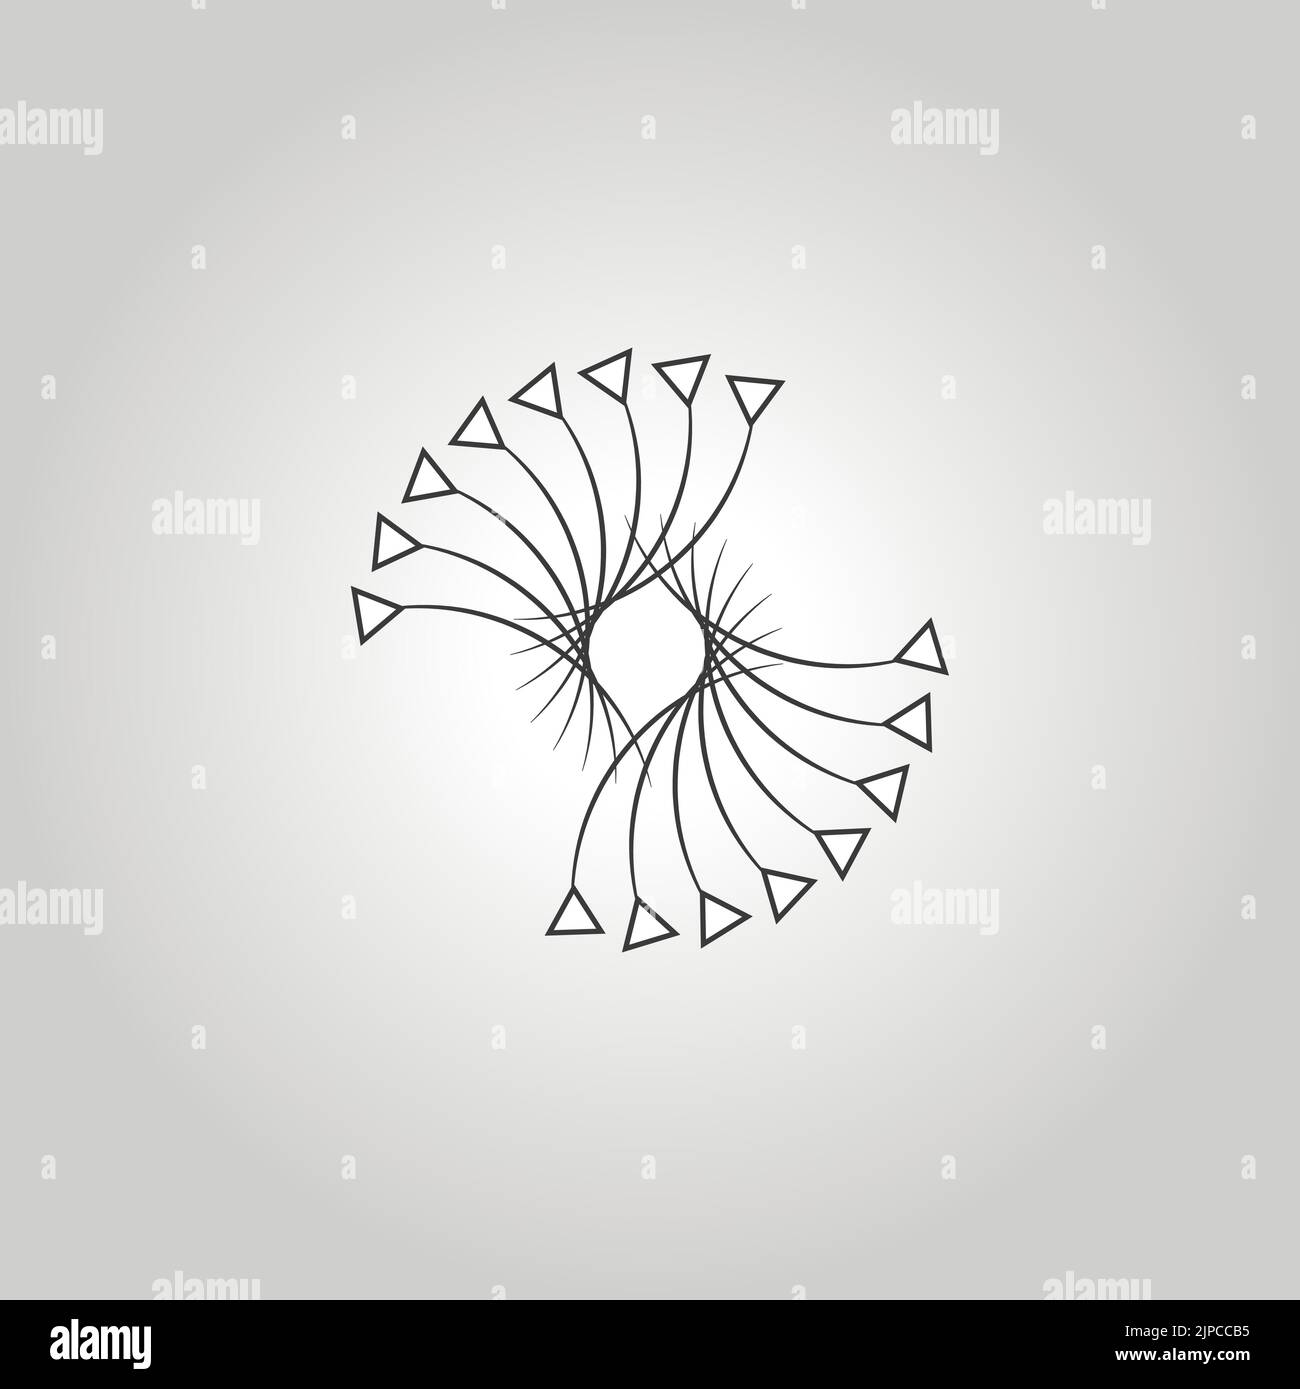 Lines with triangles in abstract style on light background. Abstract vector background pattern. Stock Vector